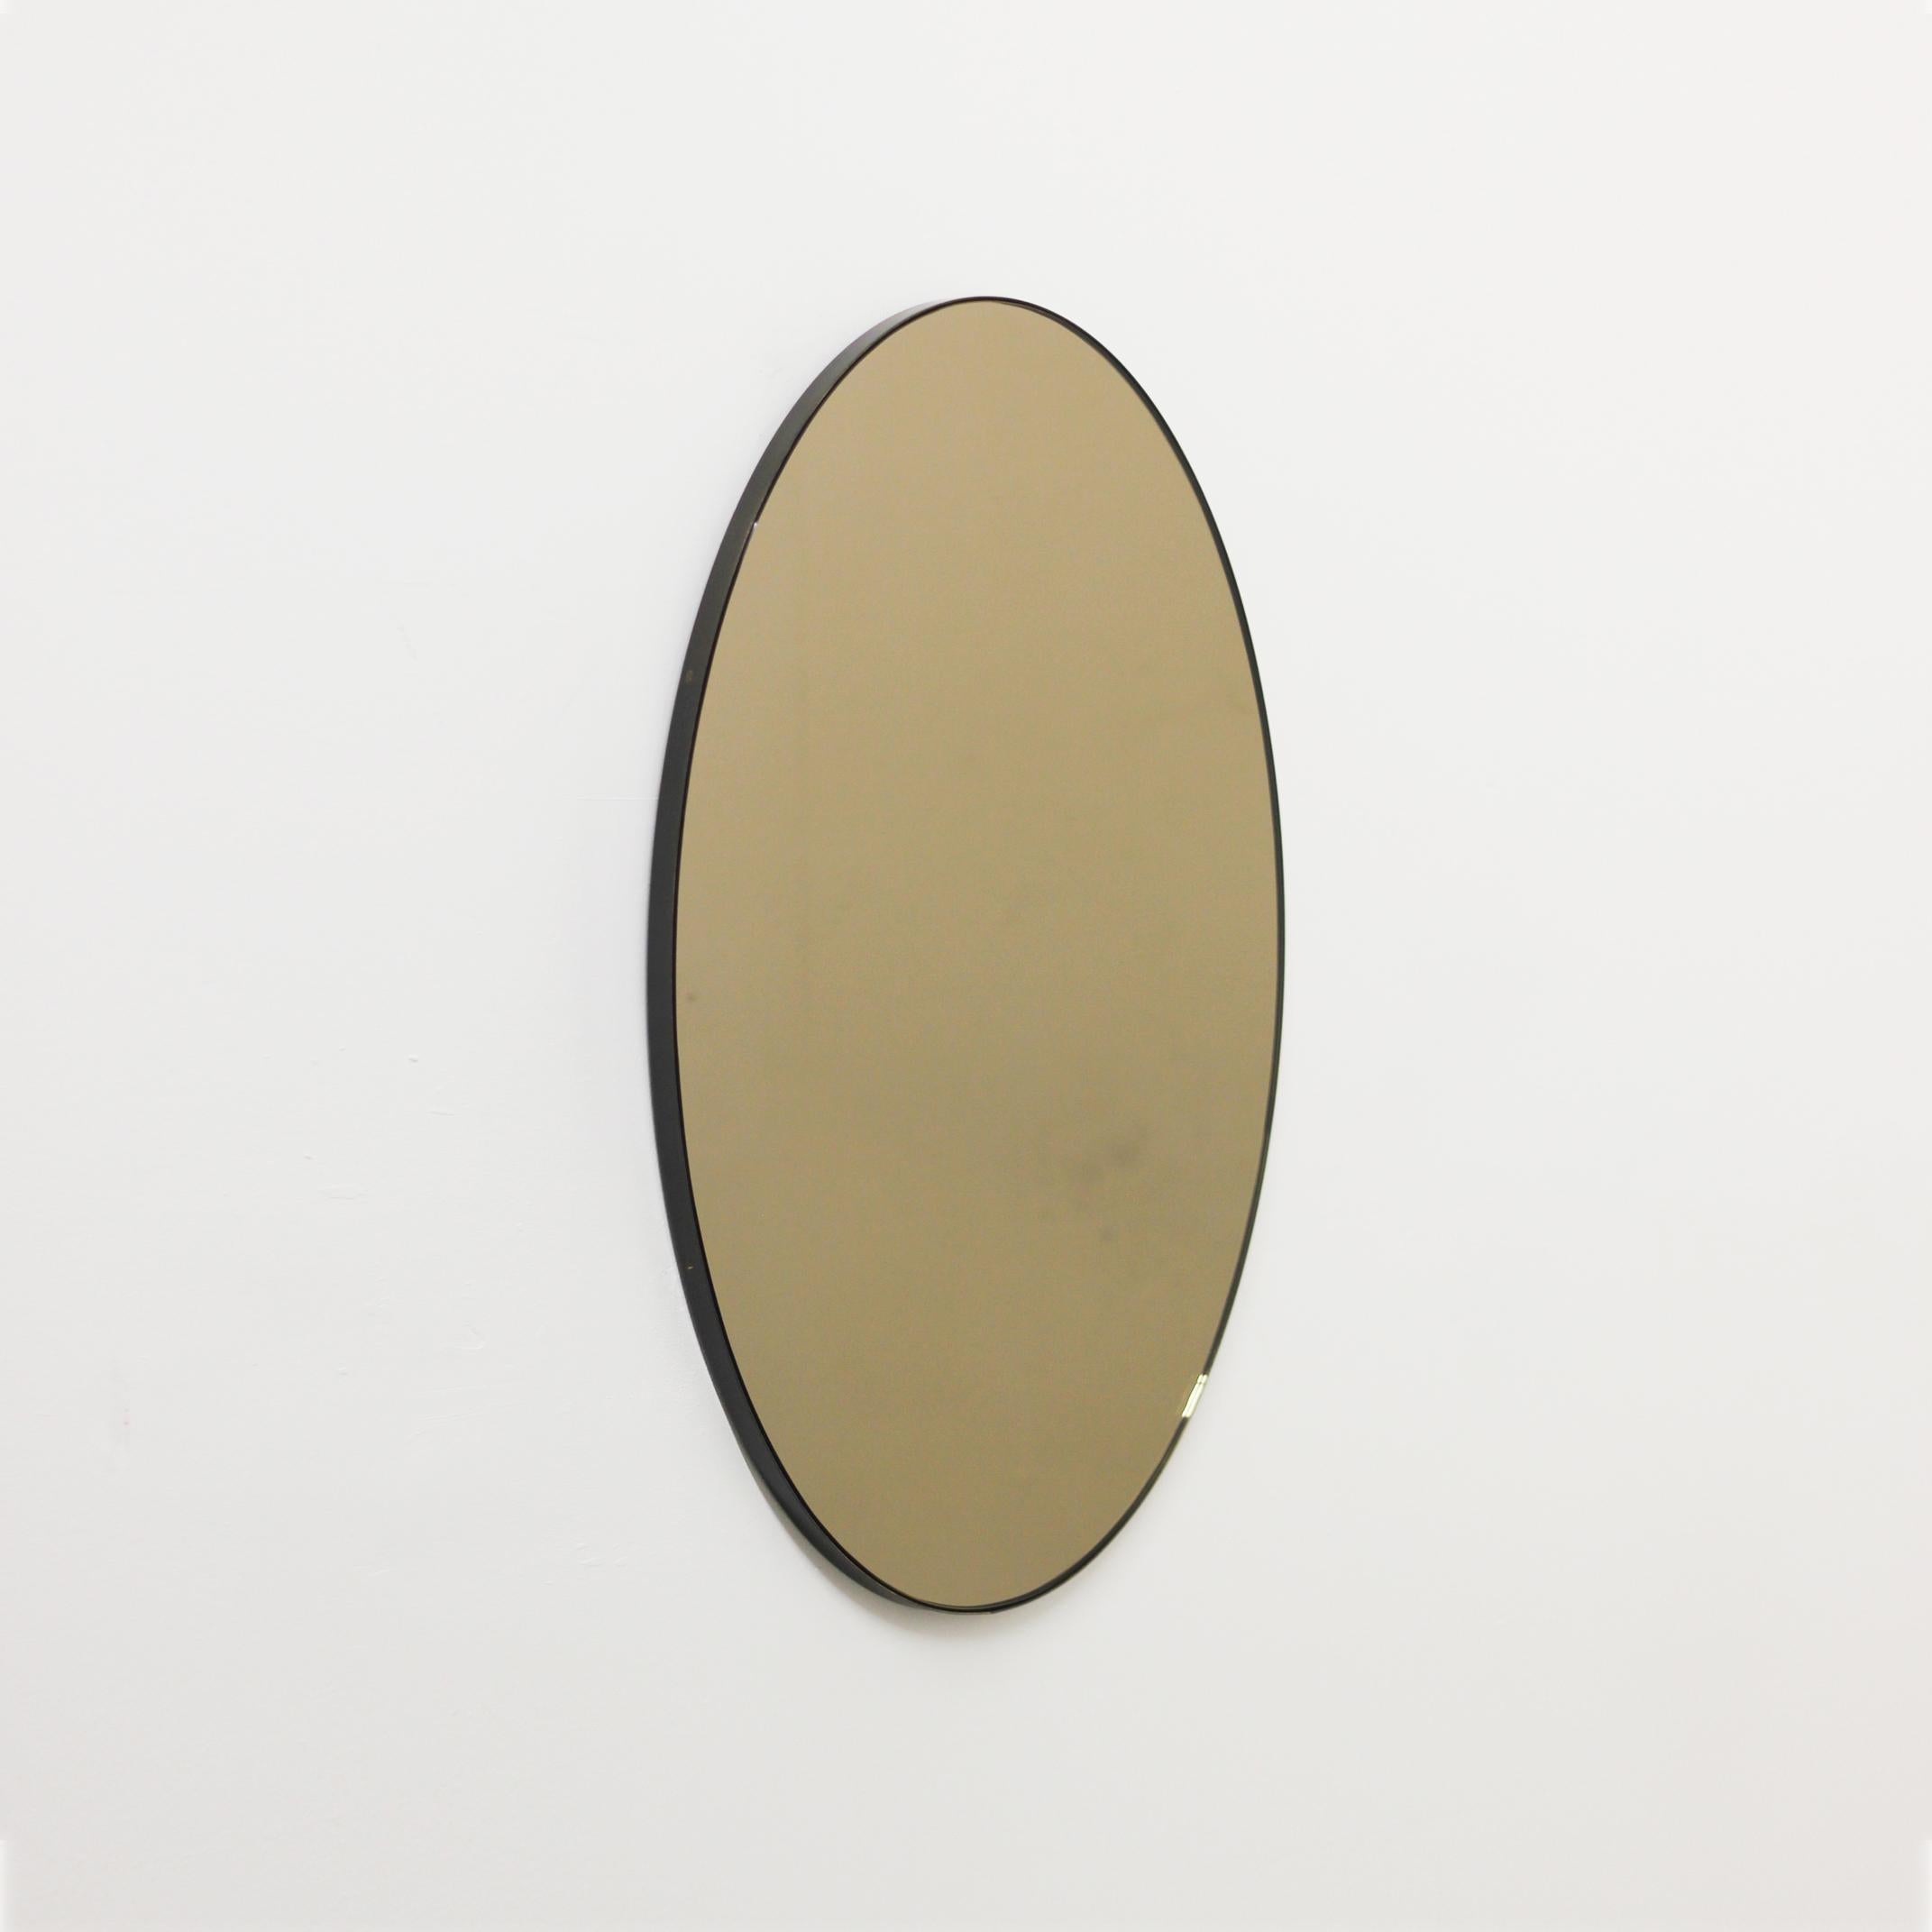 Contemporary oval bronze tinted mirror with an elegant bronze patina brass frame. Designed and handcrafted in London, UK. Supplied fully fitted with a specialist hanging system for an easy installation.

This mirror is fully customisable. Shipped